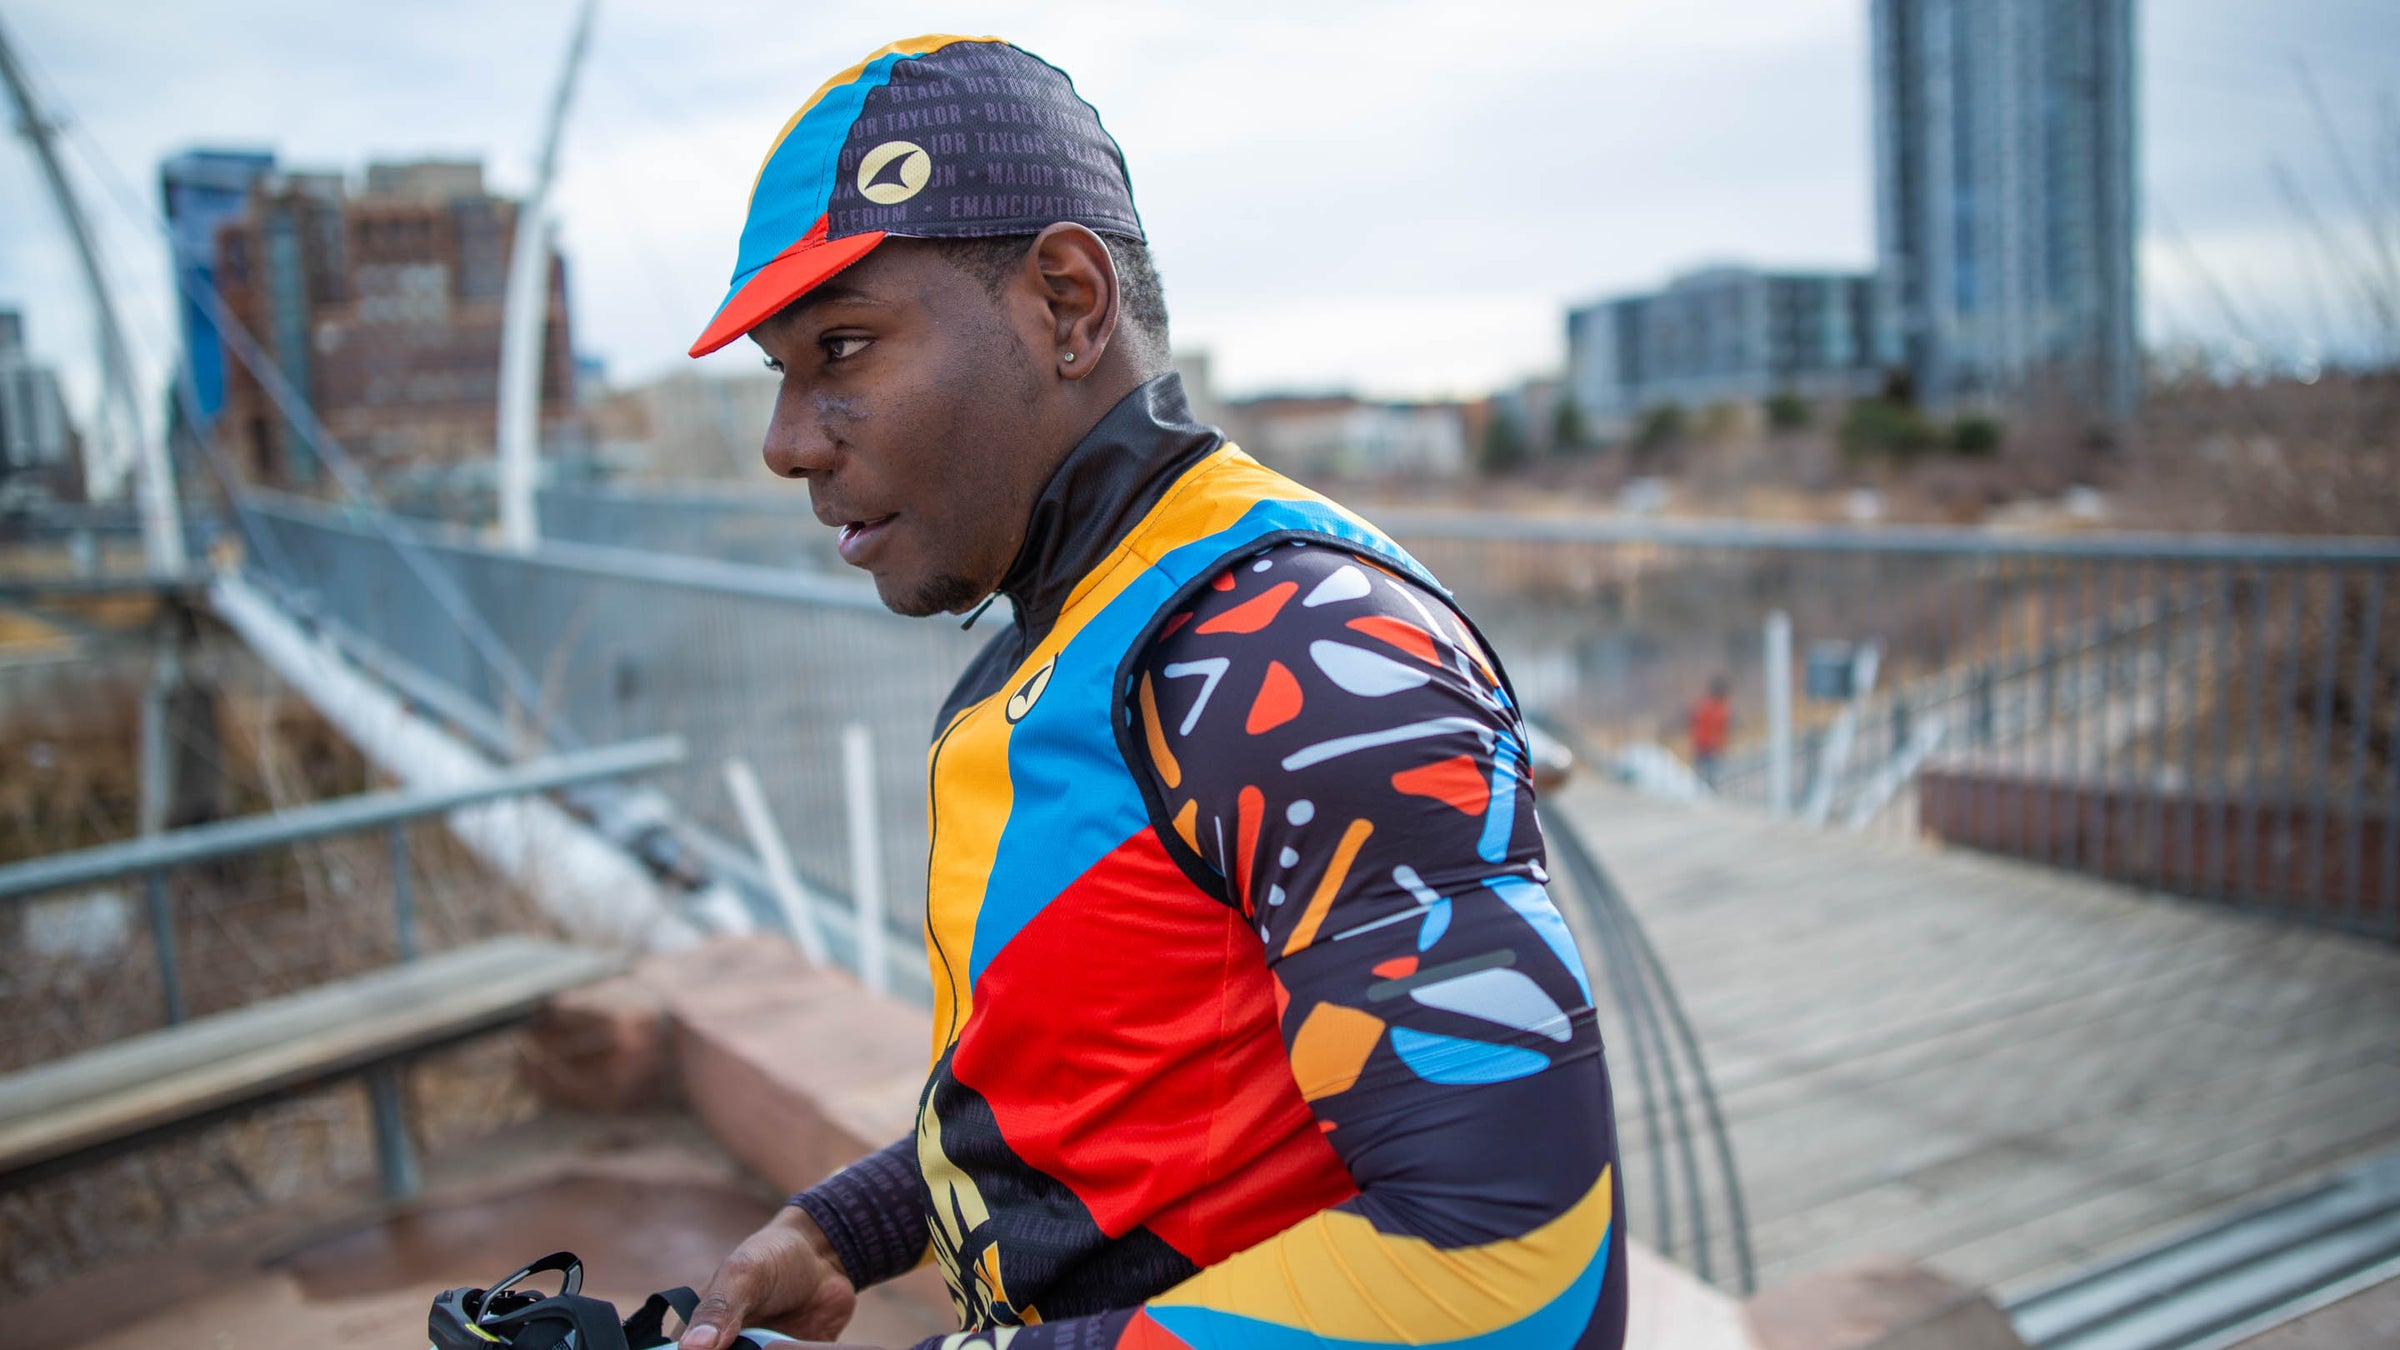 Pactimo x Major Taylor Iron Riders - Cycling collection celebrating Black History Month